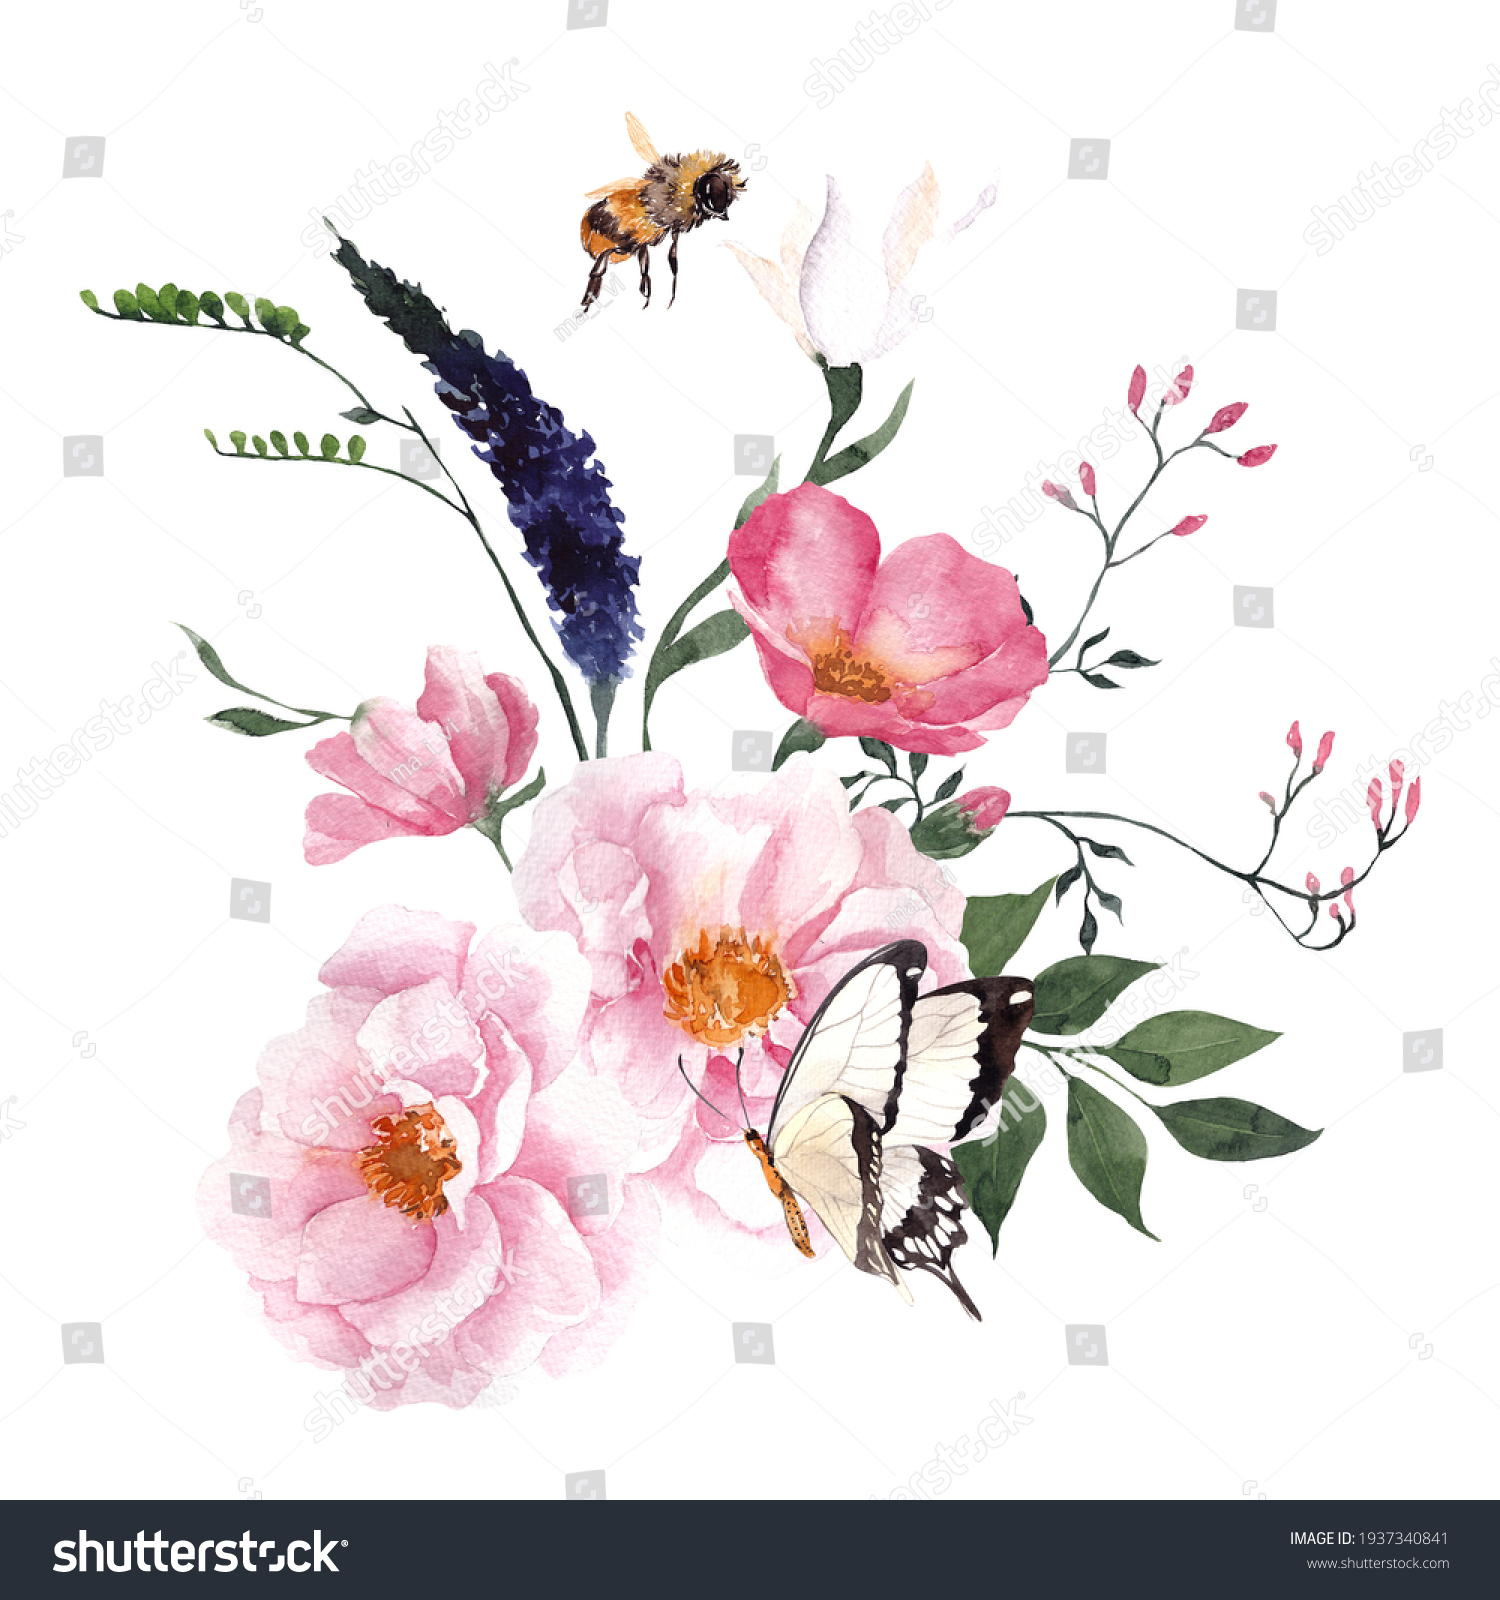 Watercolor Bouquet Wildflowers Herbs Leaves Isolated Stock Illustration 1937340841 Shutterstock 6502